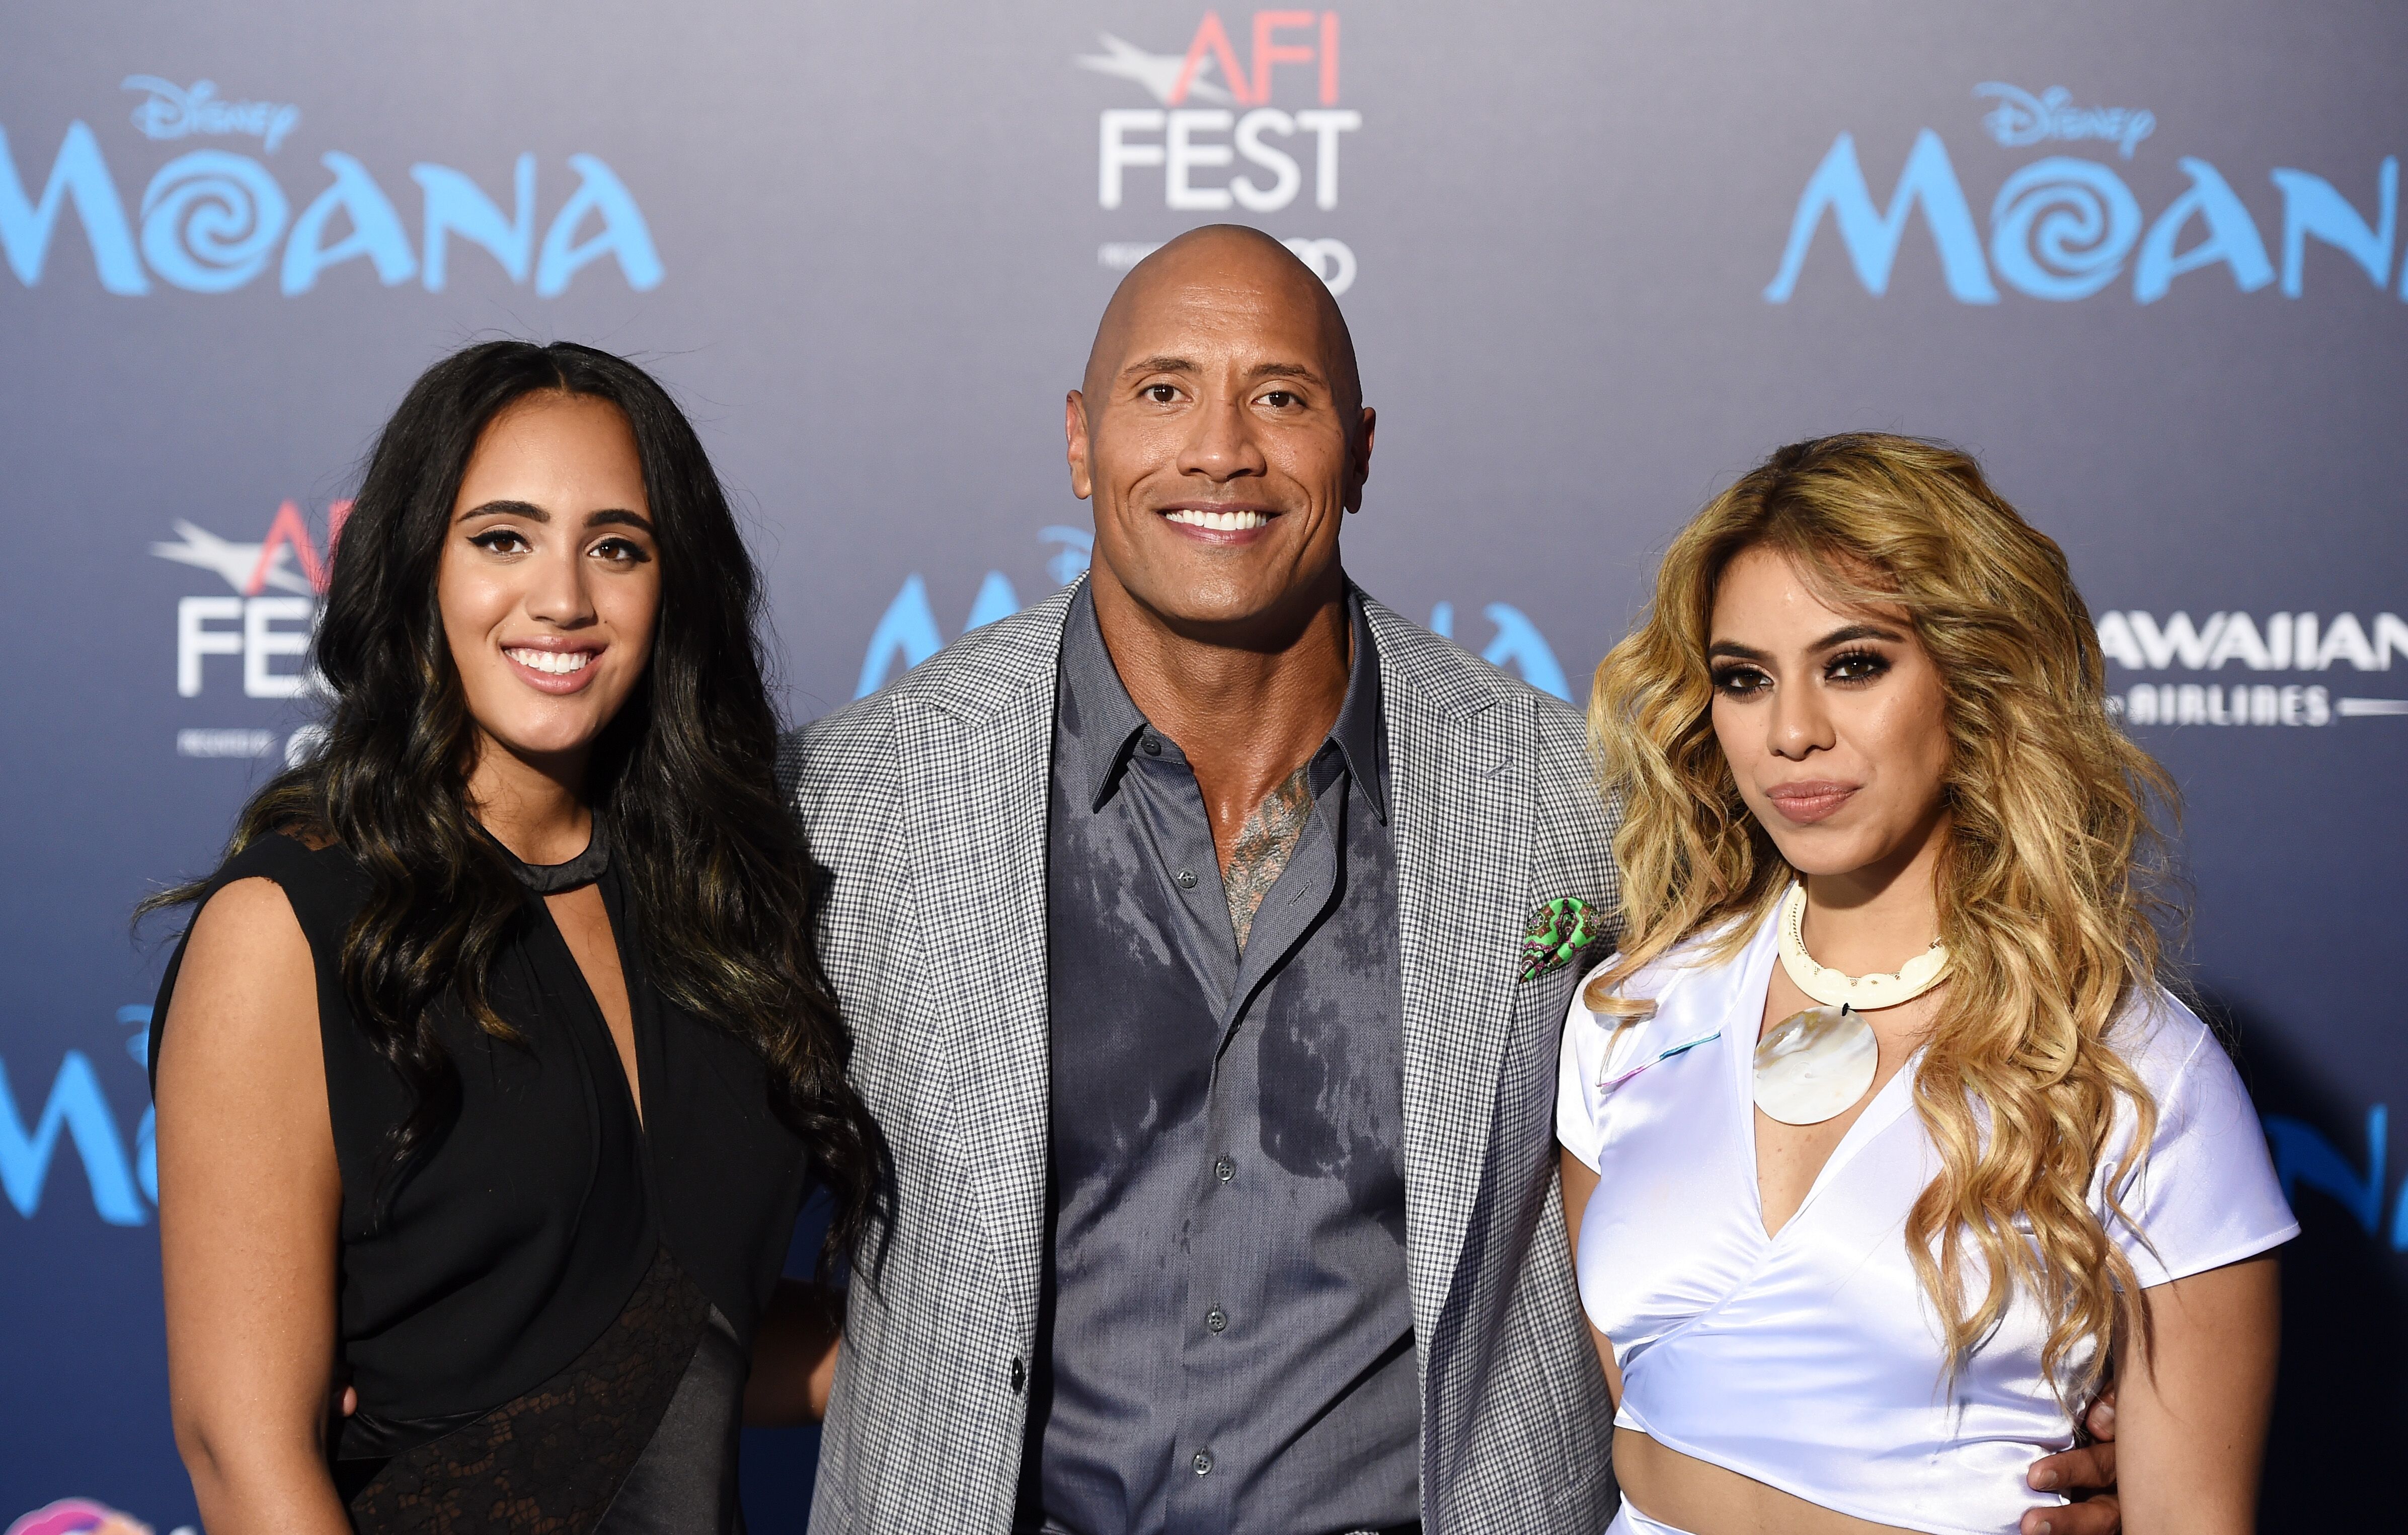 HOLLYWOOD, CA - NOVEMBER 14: (L-R) Simone Alexandra Johnson, actor Dwayne Johnson and singer Dinah Jane Hansen arrive at the AFI FEST 2016 Presented By Audi premiere of Disney's "Moana" at the El Capitan Theatre on November 14, 2016 in Hollywood, California. (Photo by Amanda Edwards/WireImage)